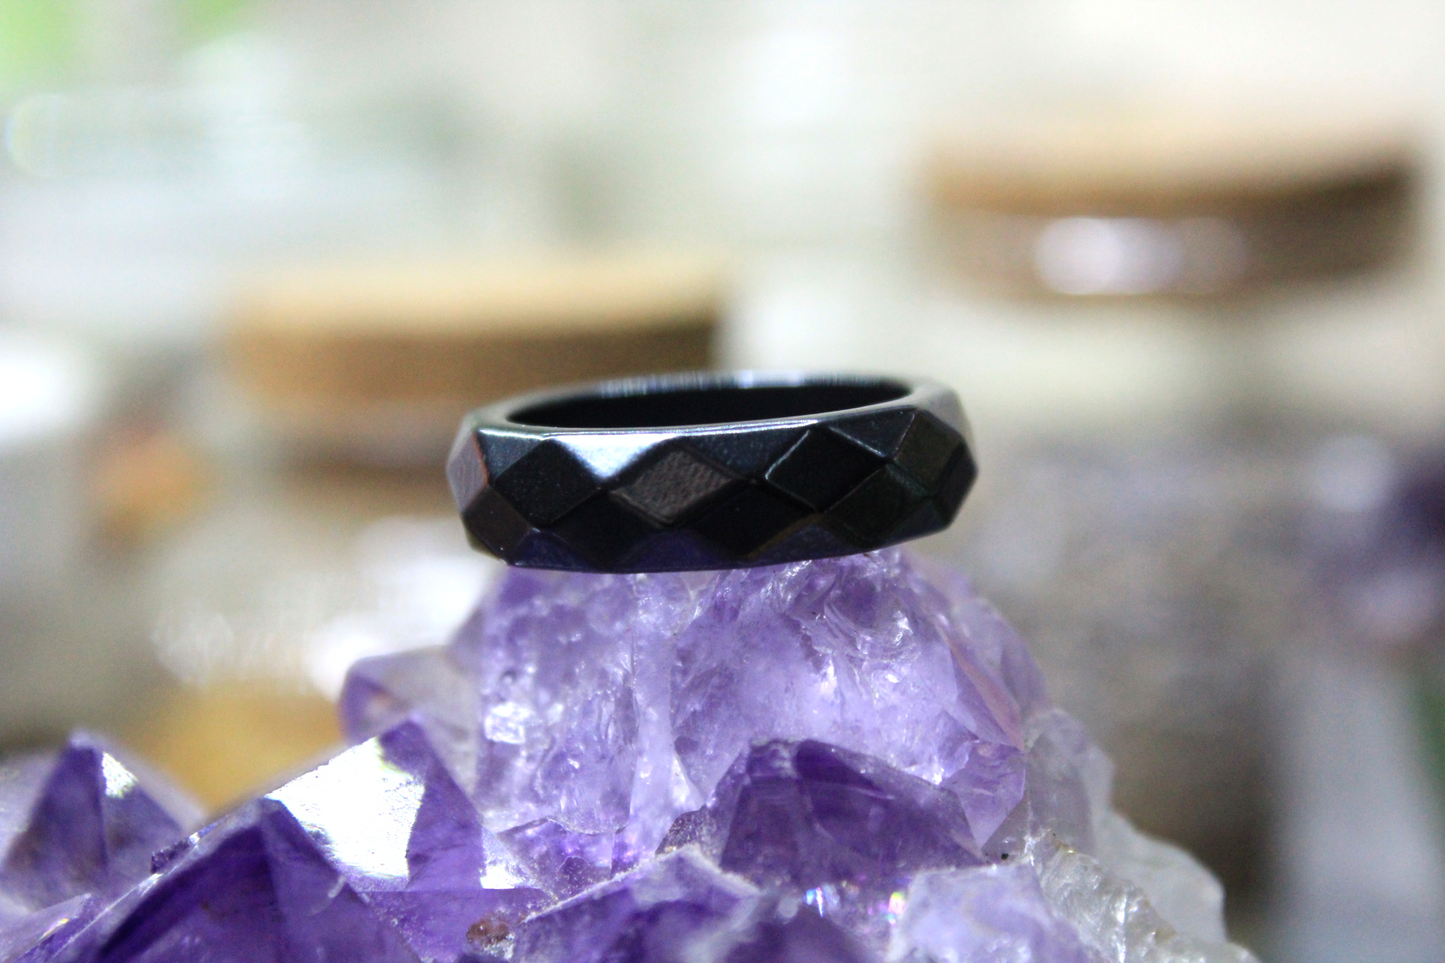 Hematite Faceted Ring